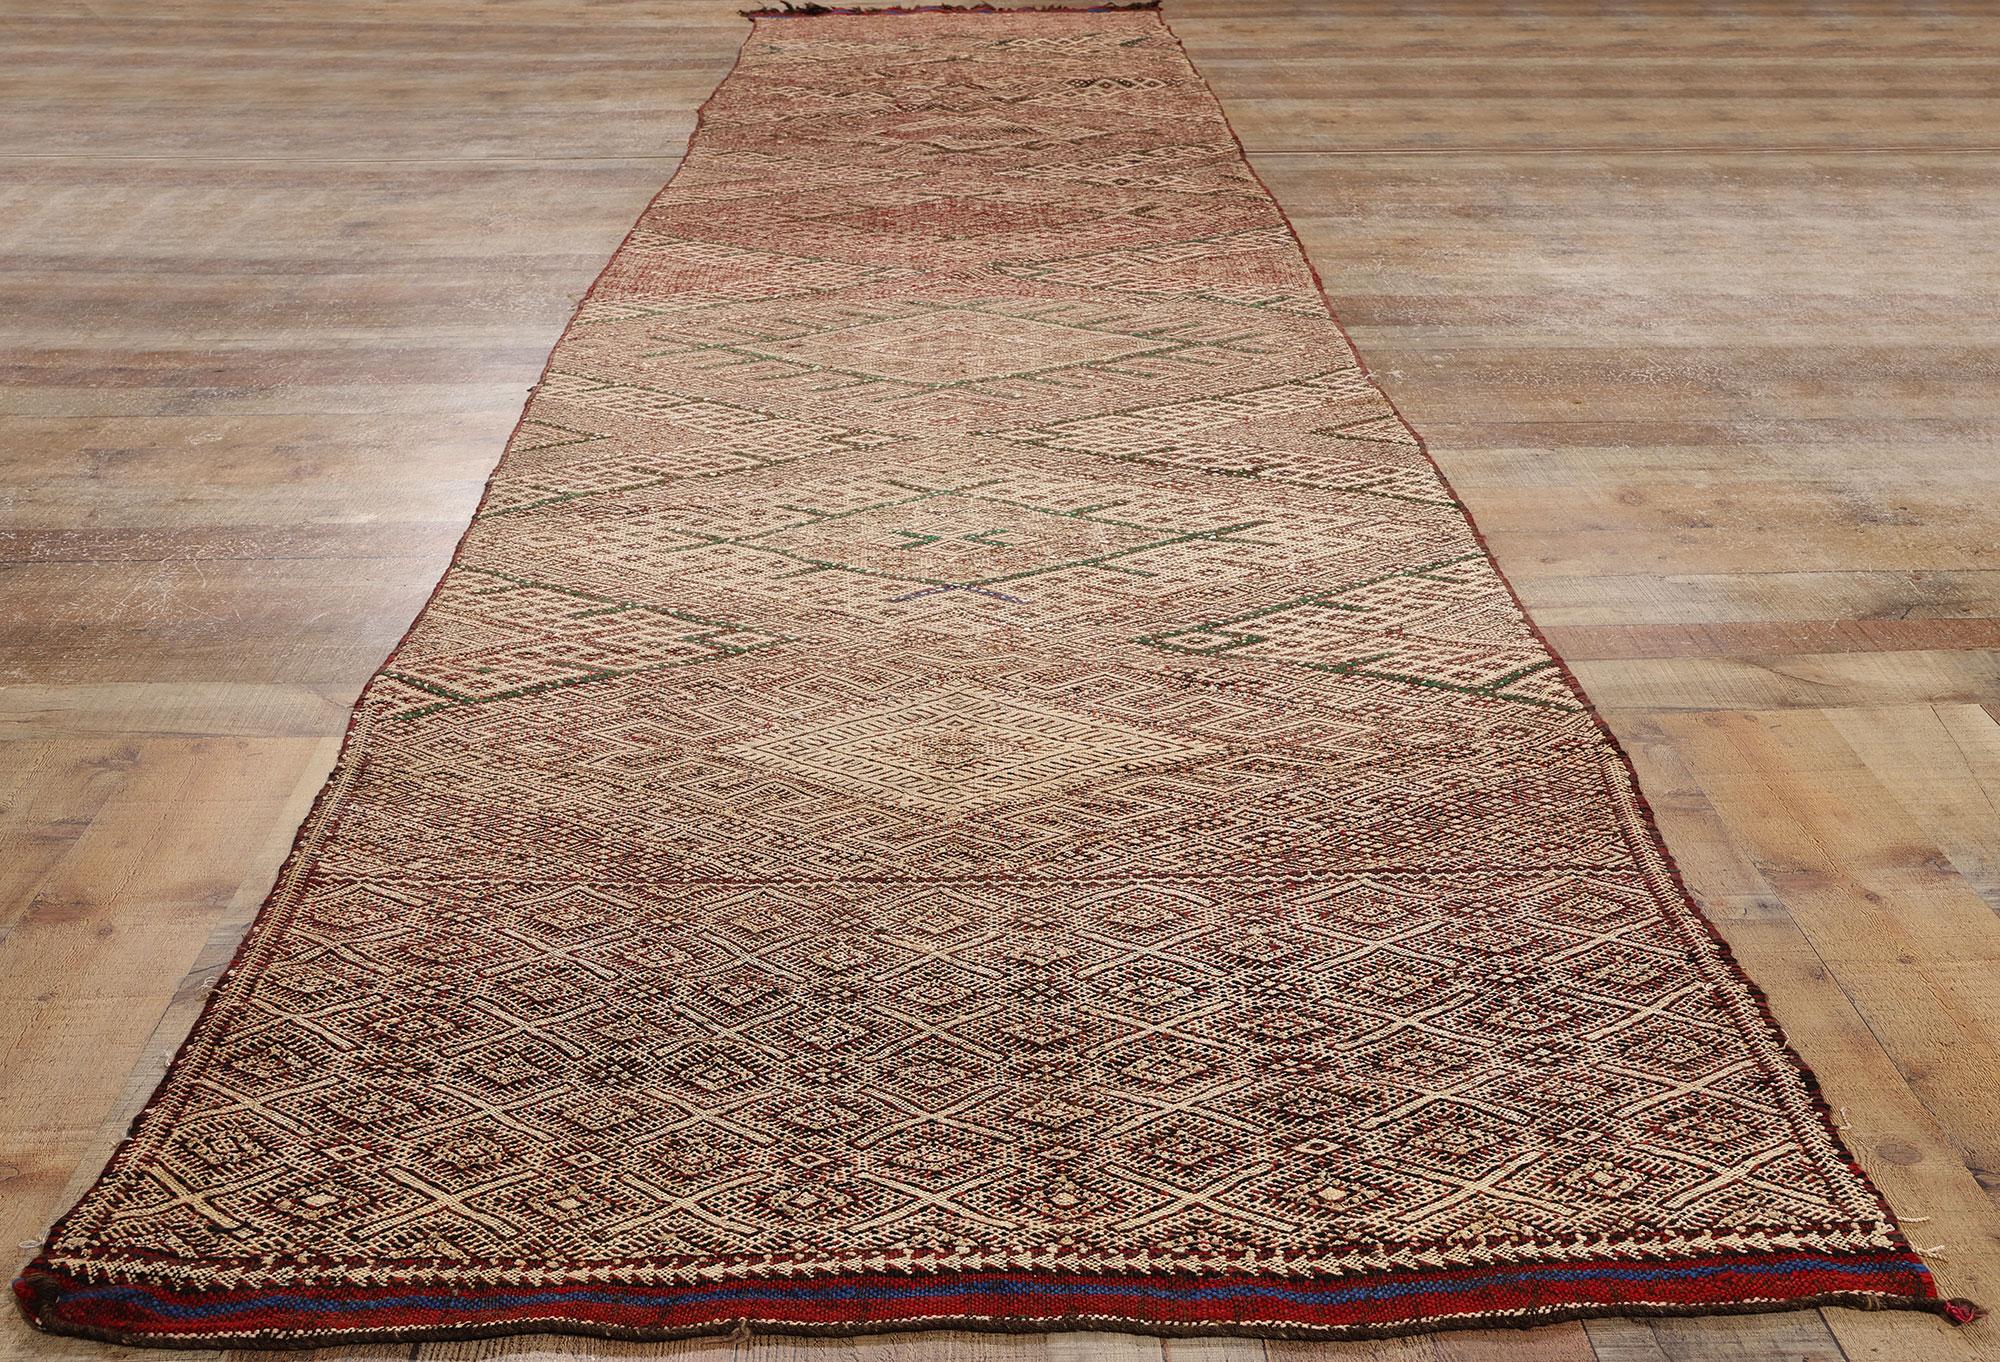 Midcentury Bohemian Vintage Moroccan Zemmour Kilim Berber Rug, 03'04 x 17'06 In Good Condition For Sale In Dallas, TX